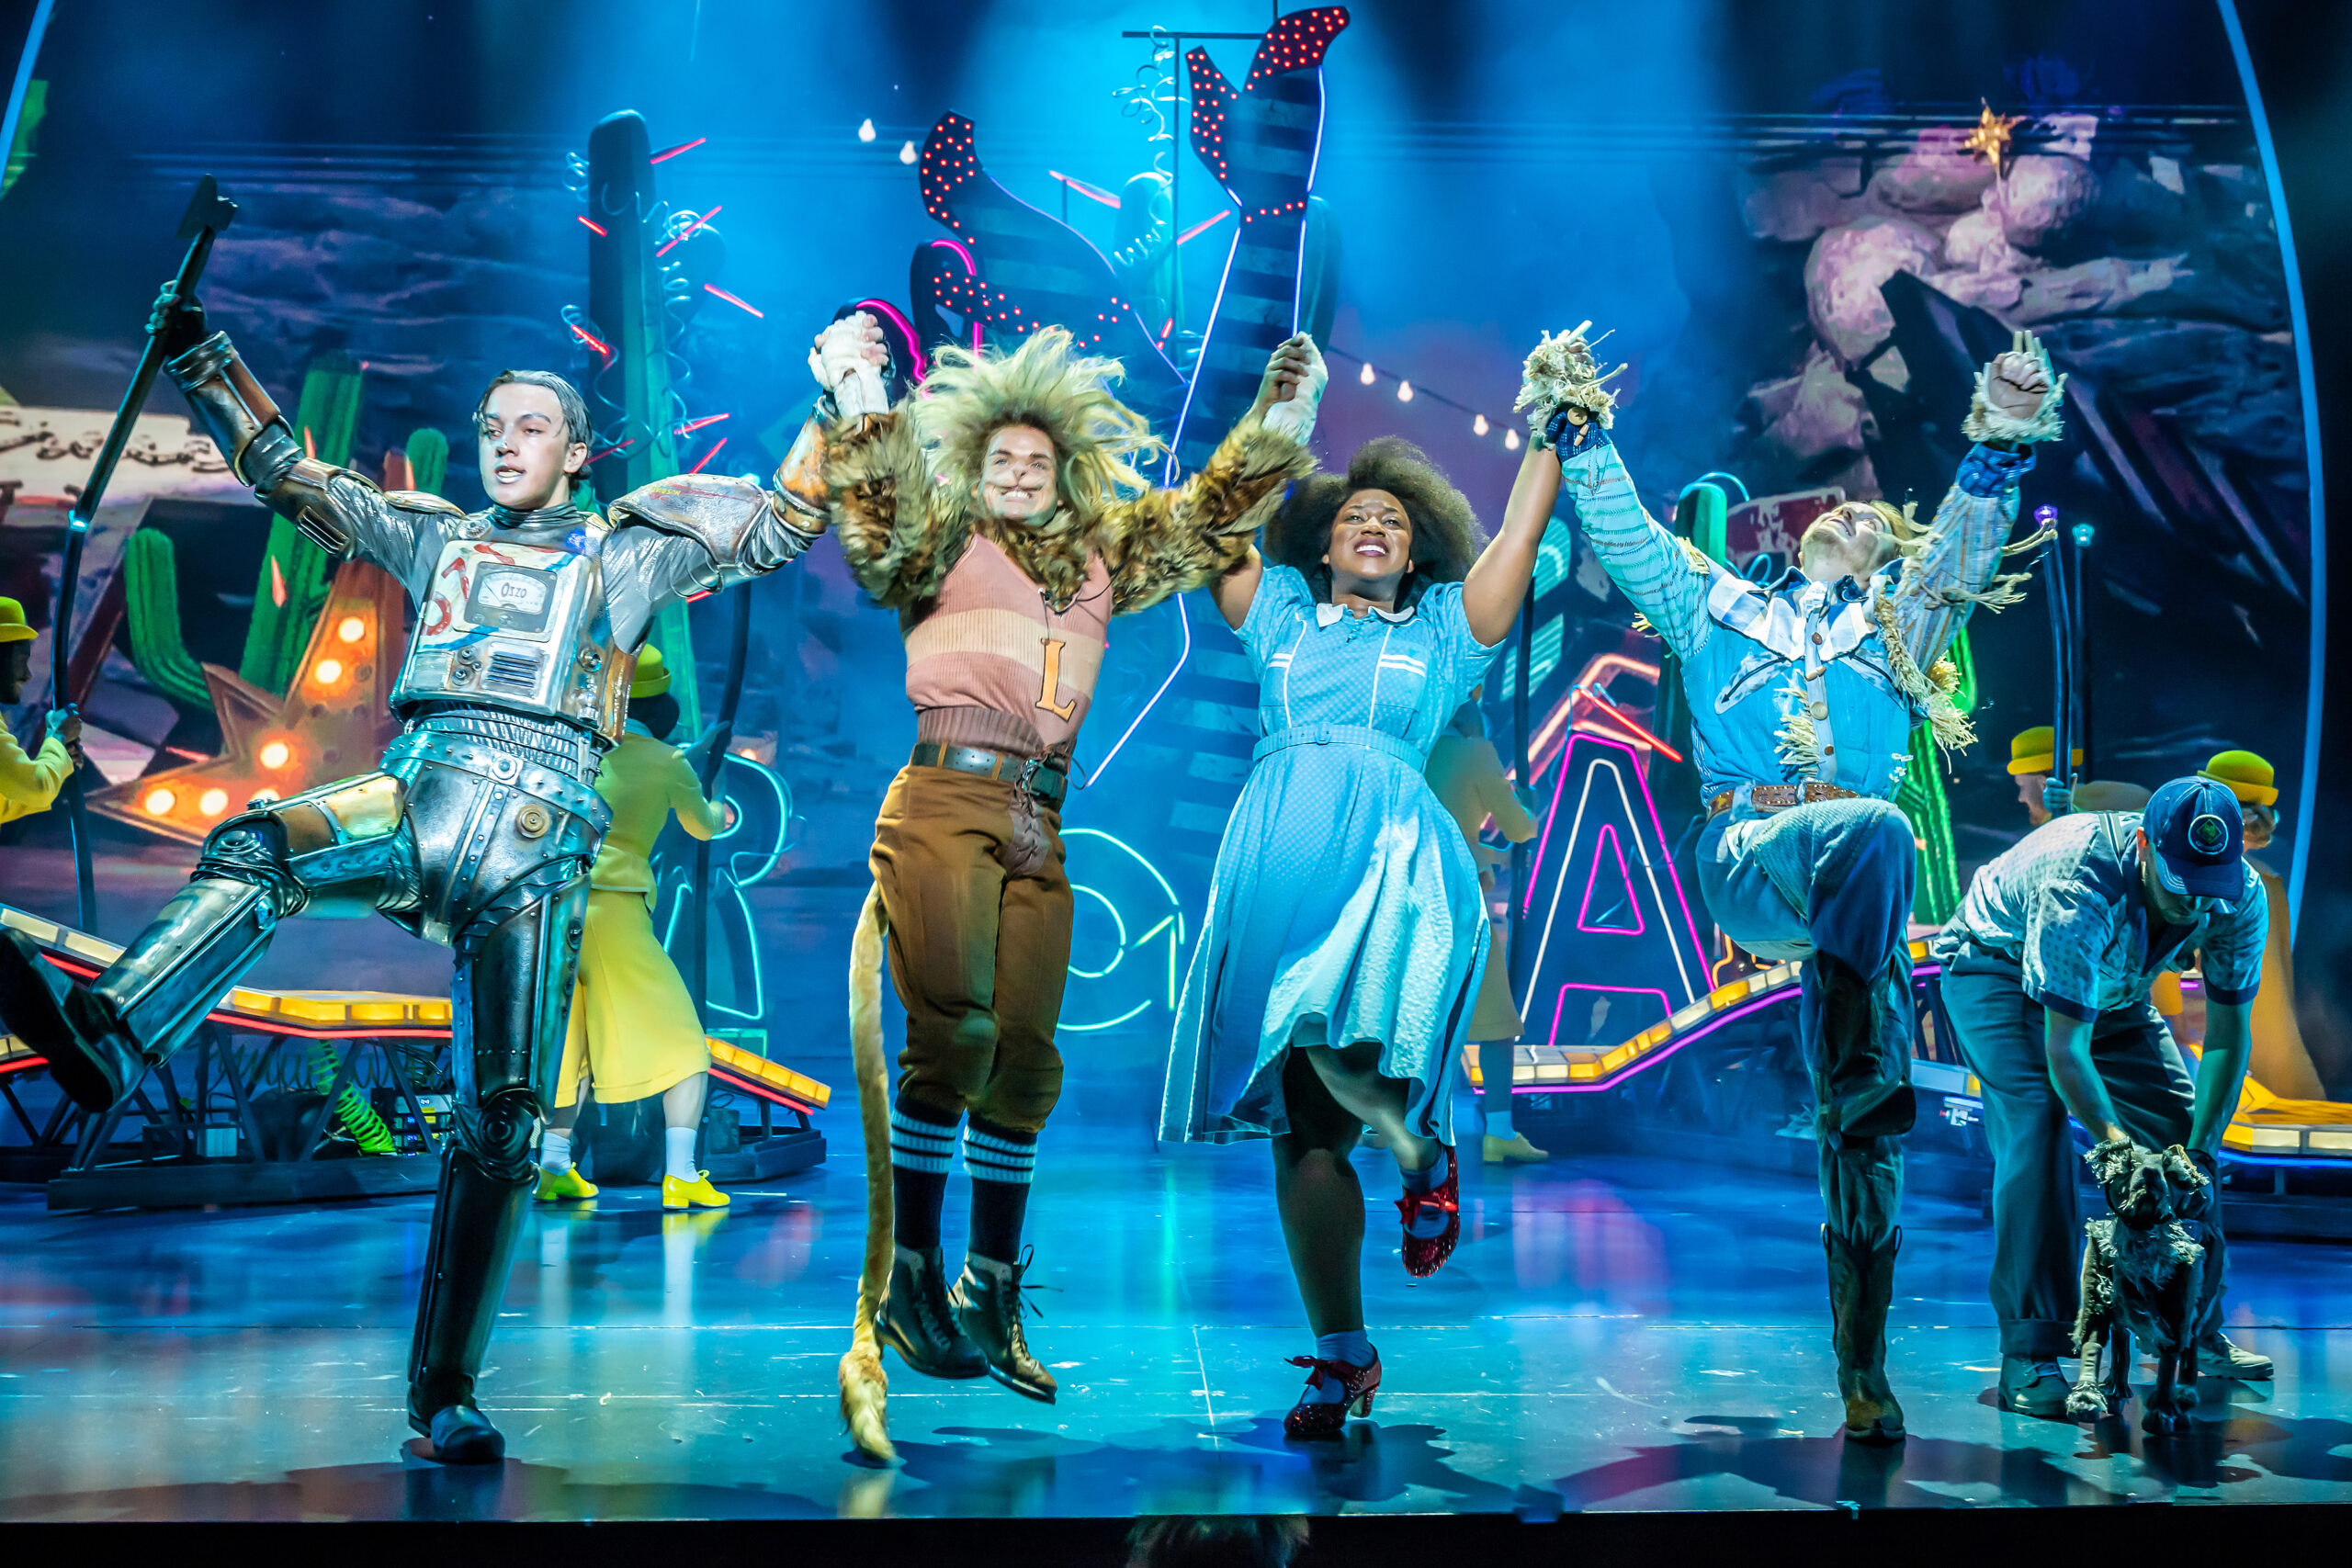 Production photograph from The Wizard of Oz. Tin Man (Paul French), Lion (Giovanni Spanó), Dorothy (Georgina Onuorah), Scarecrow (Jonny Fines) and Toto (Ben Thompson) leap into the air joyfully in front of neon signs on a blue stage. There is a white RP - Relaxed Performance - logo top left).